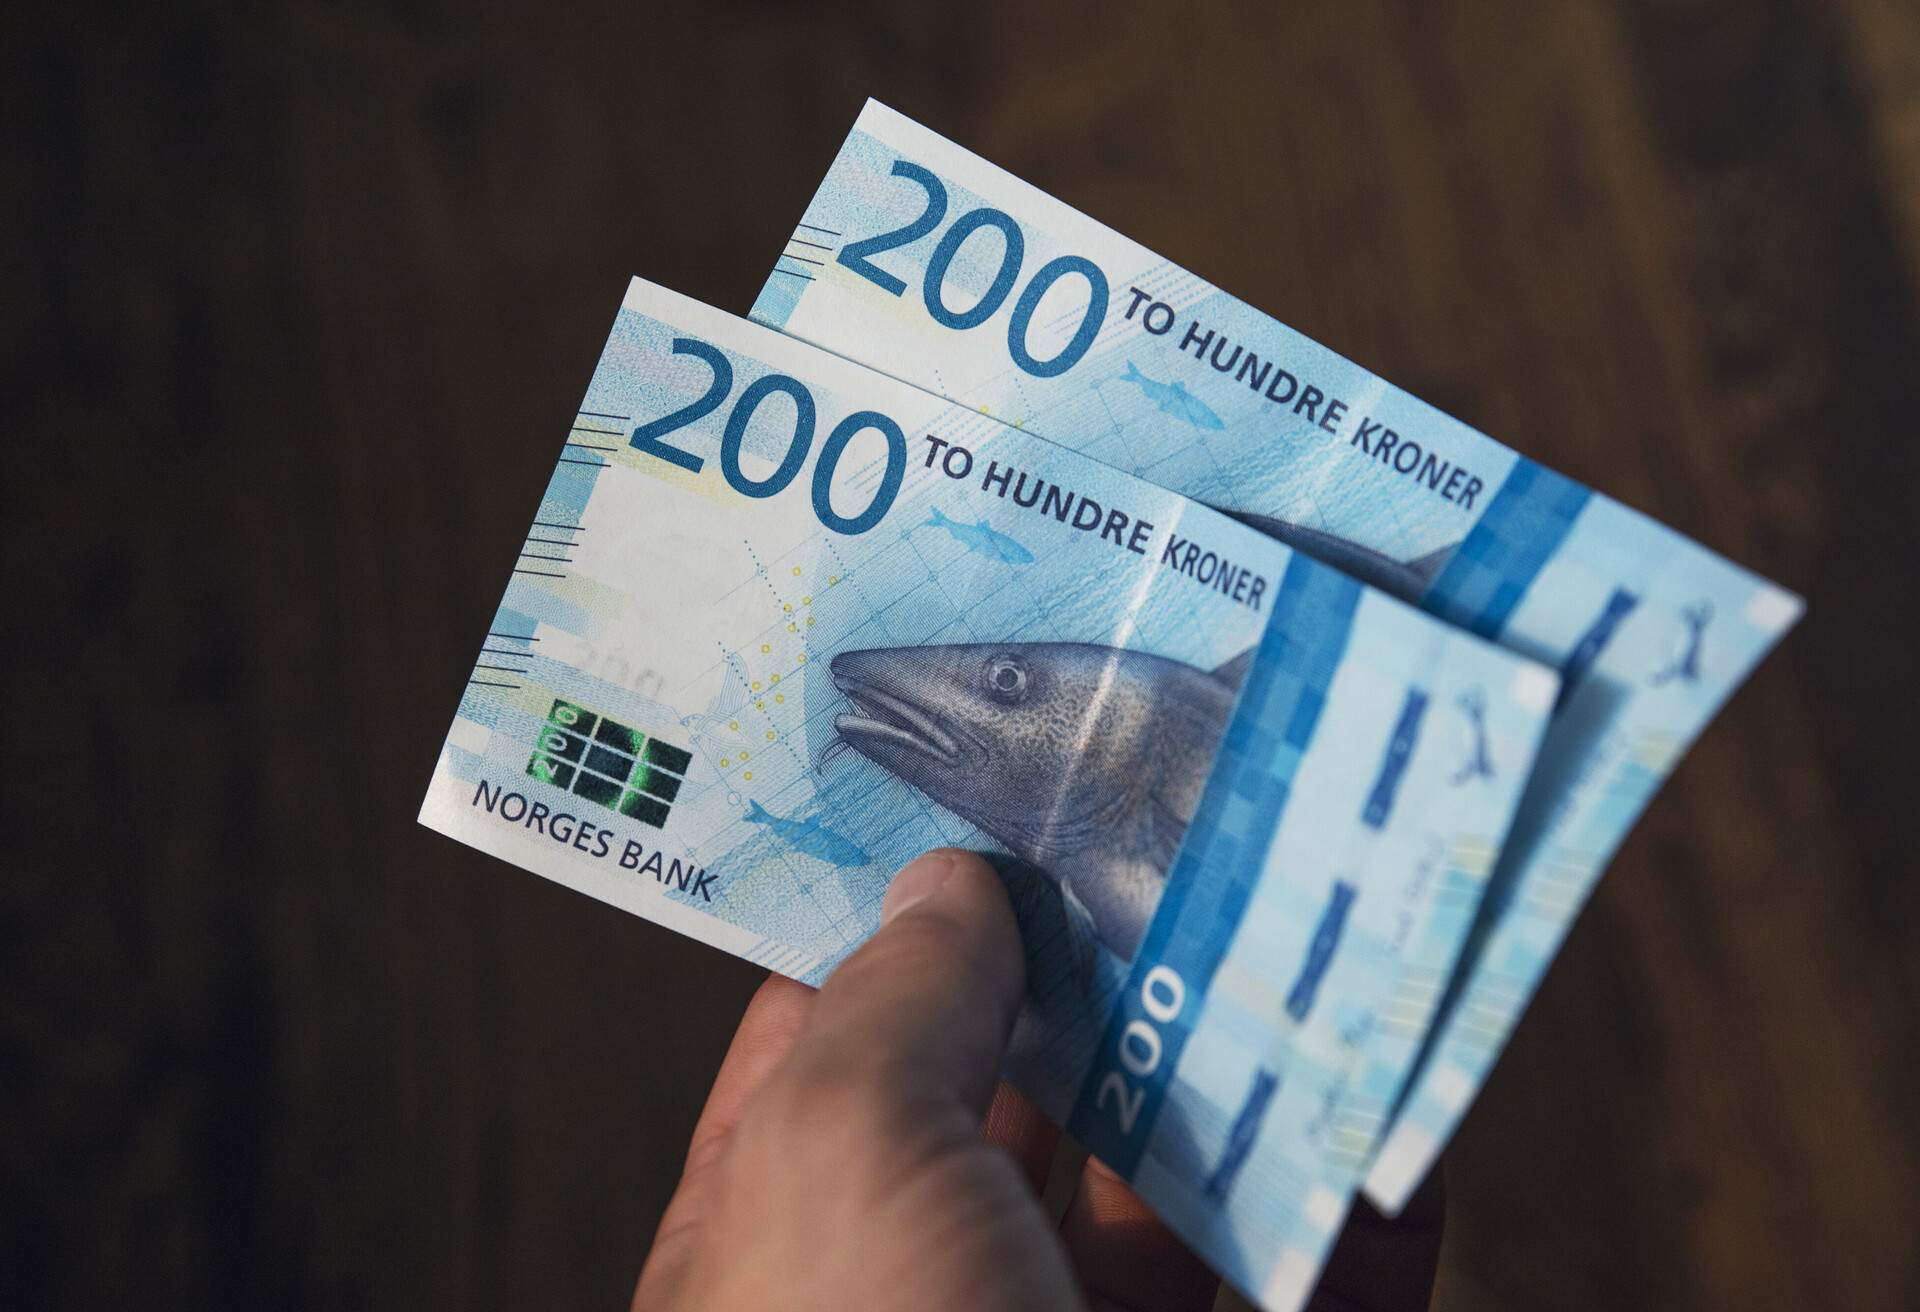 Two hundred denomination kroner banknotes sit in an arranged photograph in Oslo, Norway. Photographer: Kyrre Lien/Bloomberg